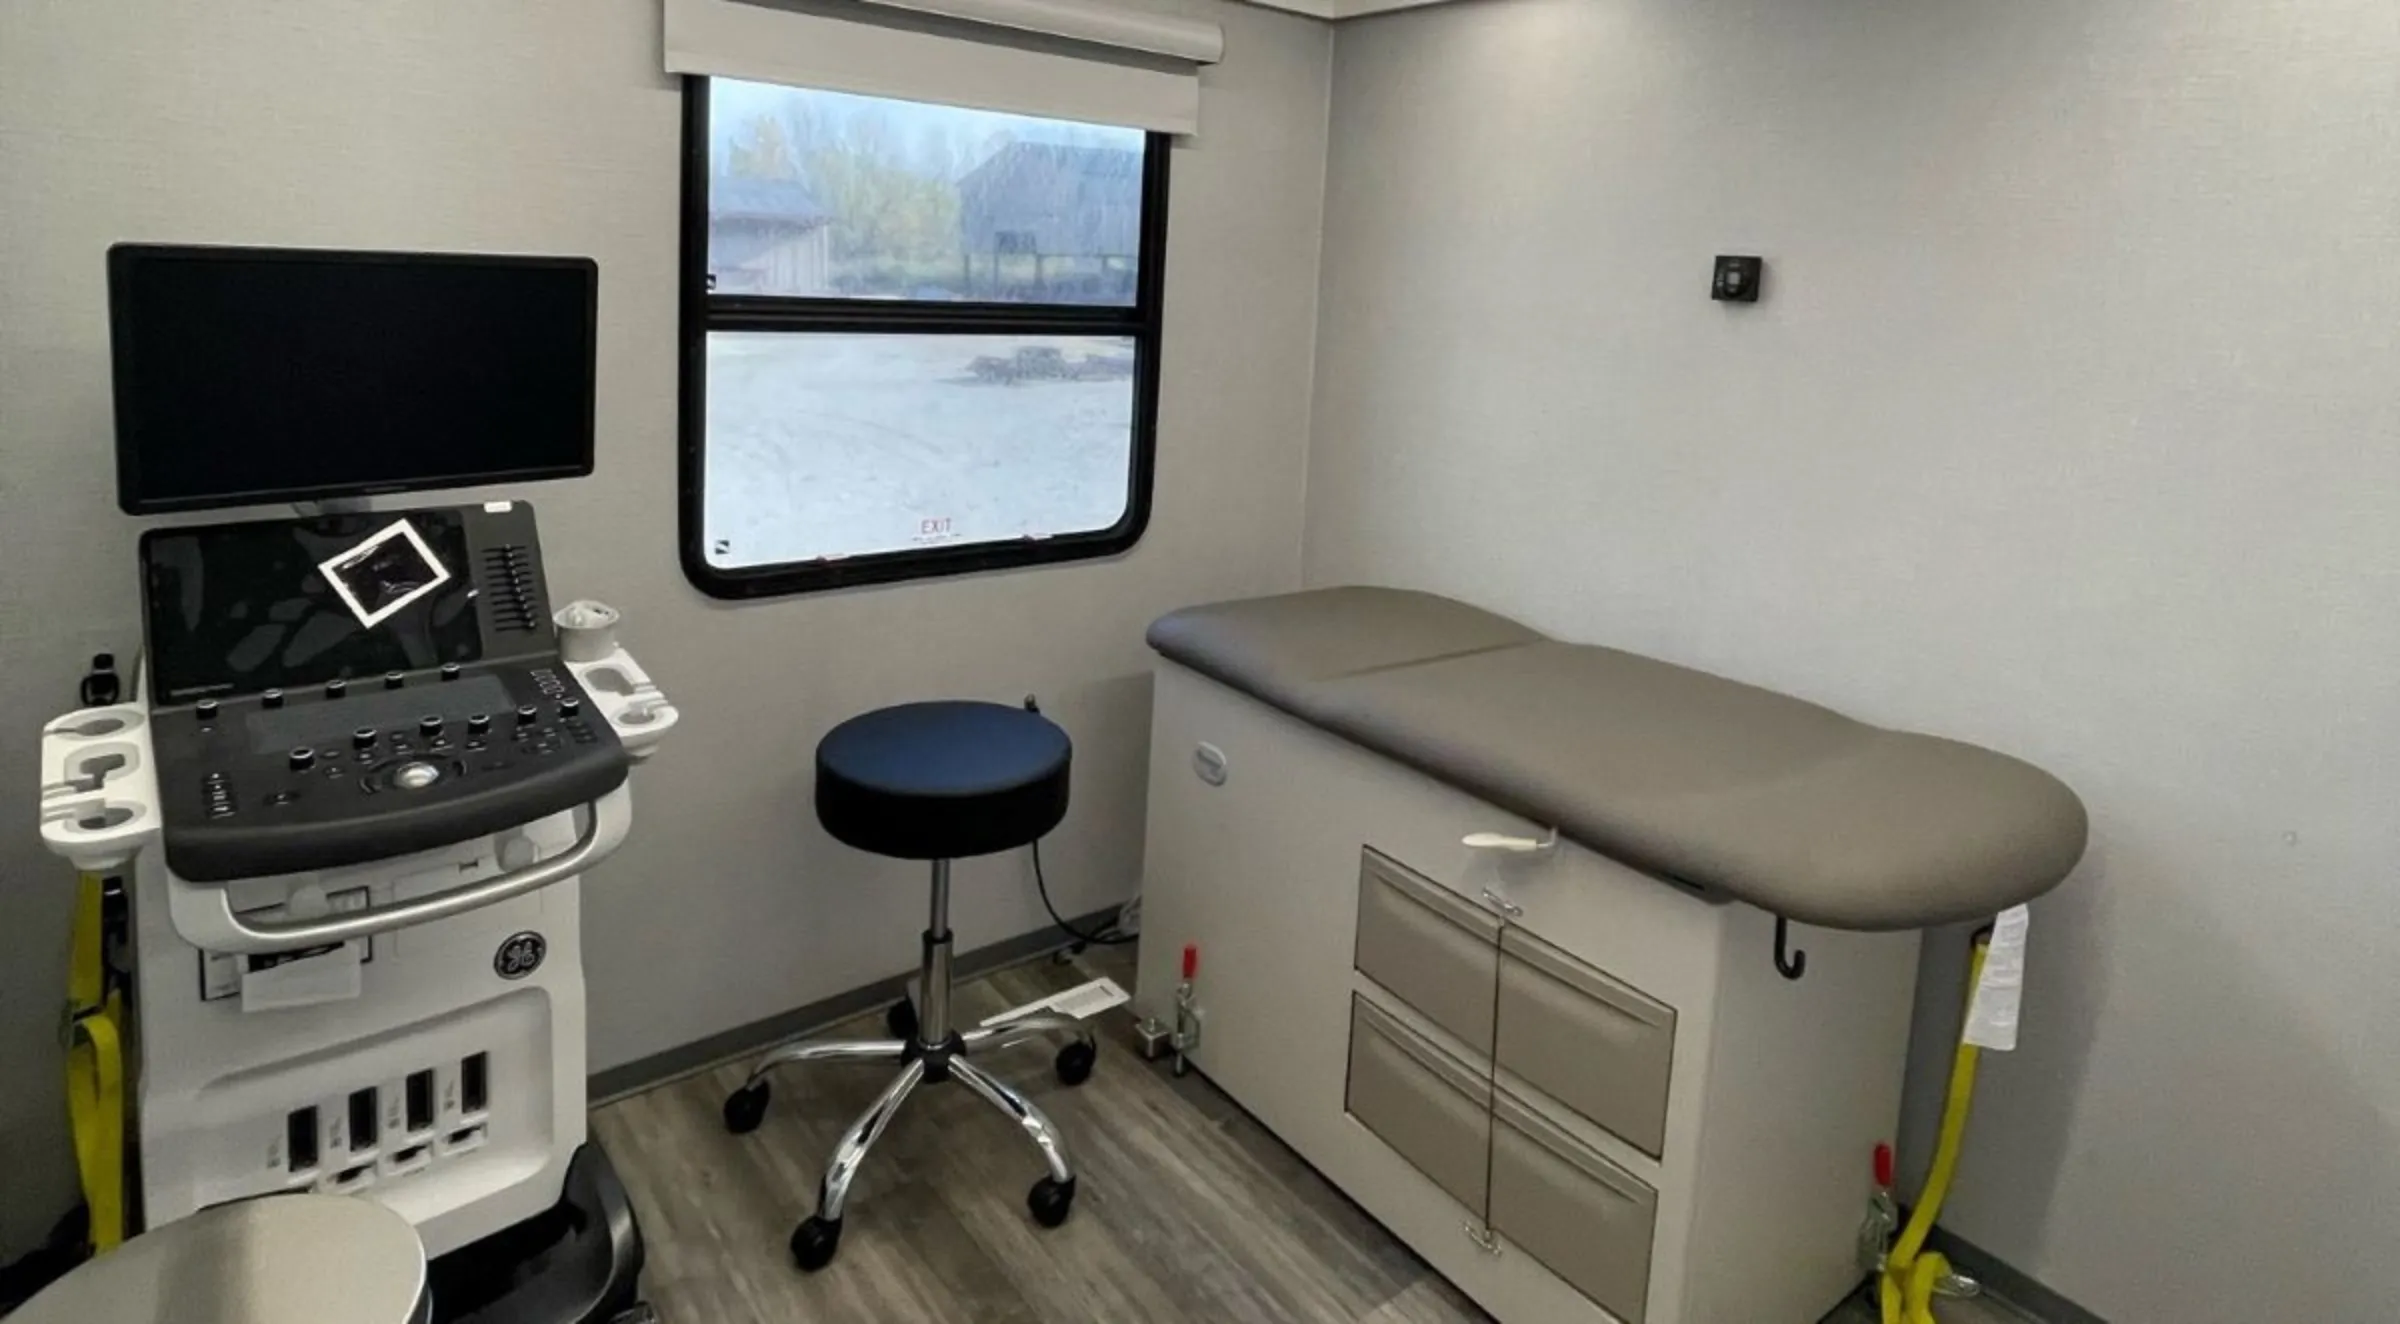 The inside of a mobile clinic to be used for providing abortion procedures by Planned Parenthood is pictured in Illinois, United States in this undated photo. Planned Parenthood/Handout via Thomson Reuters Foundation